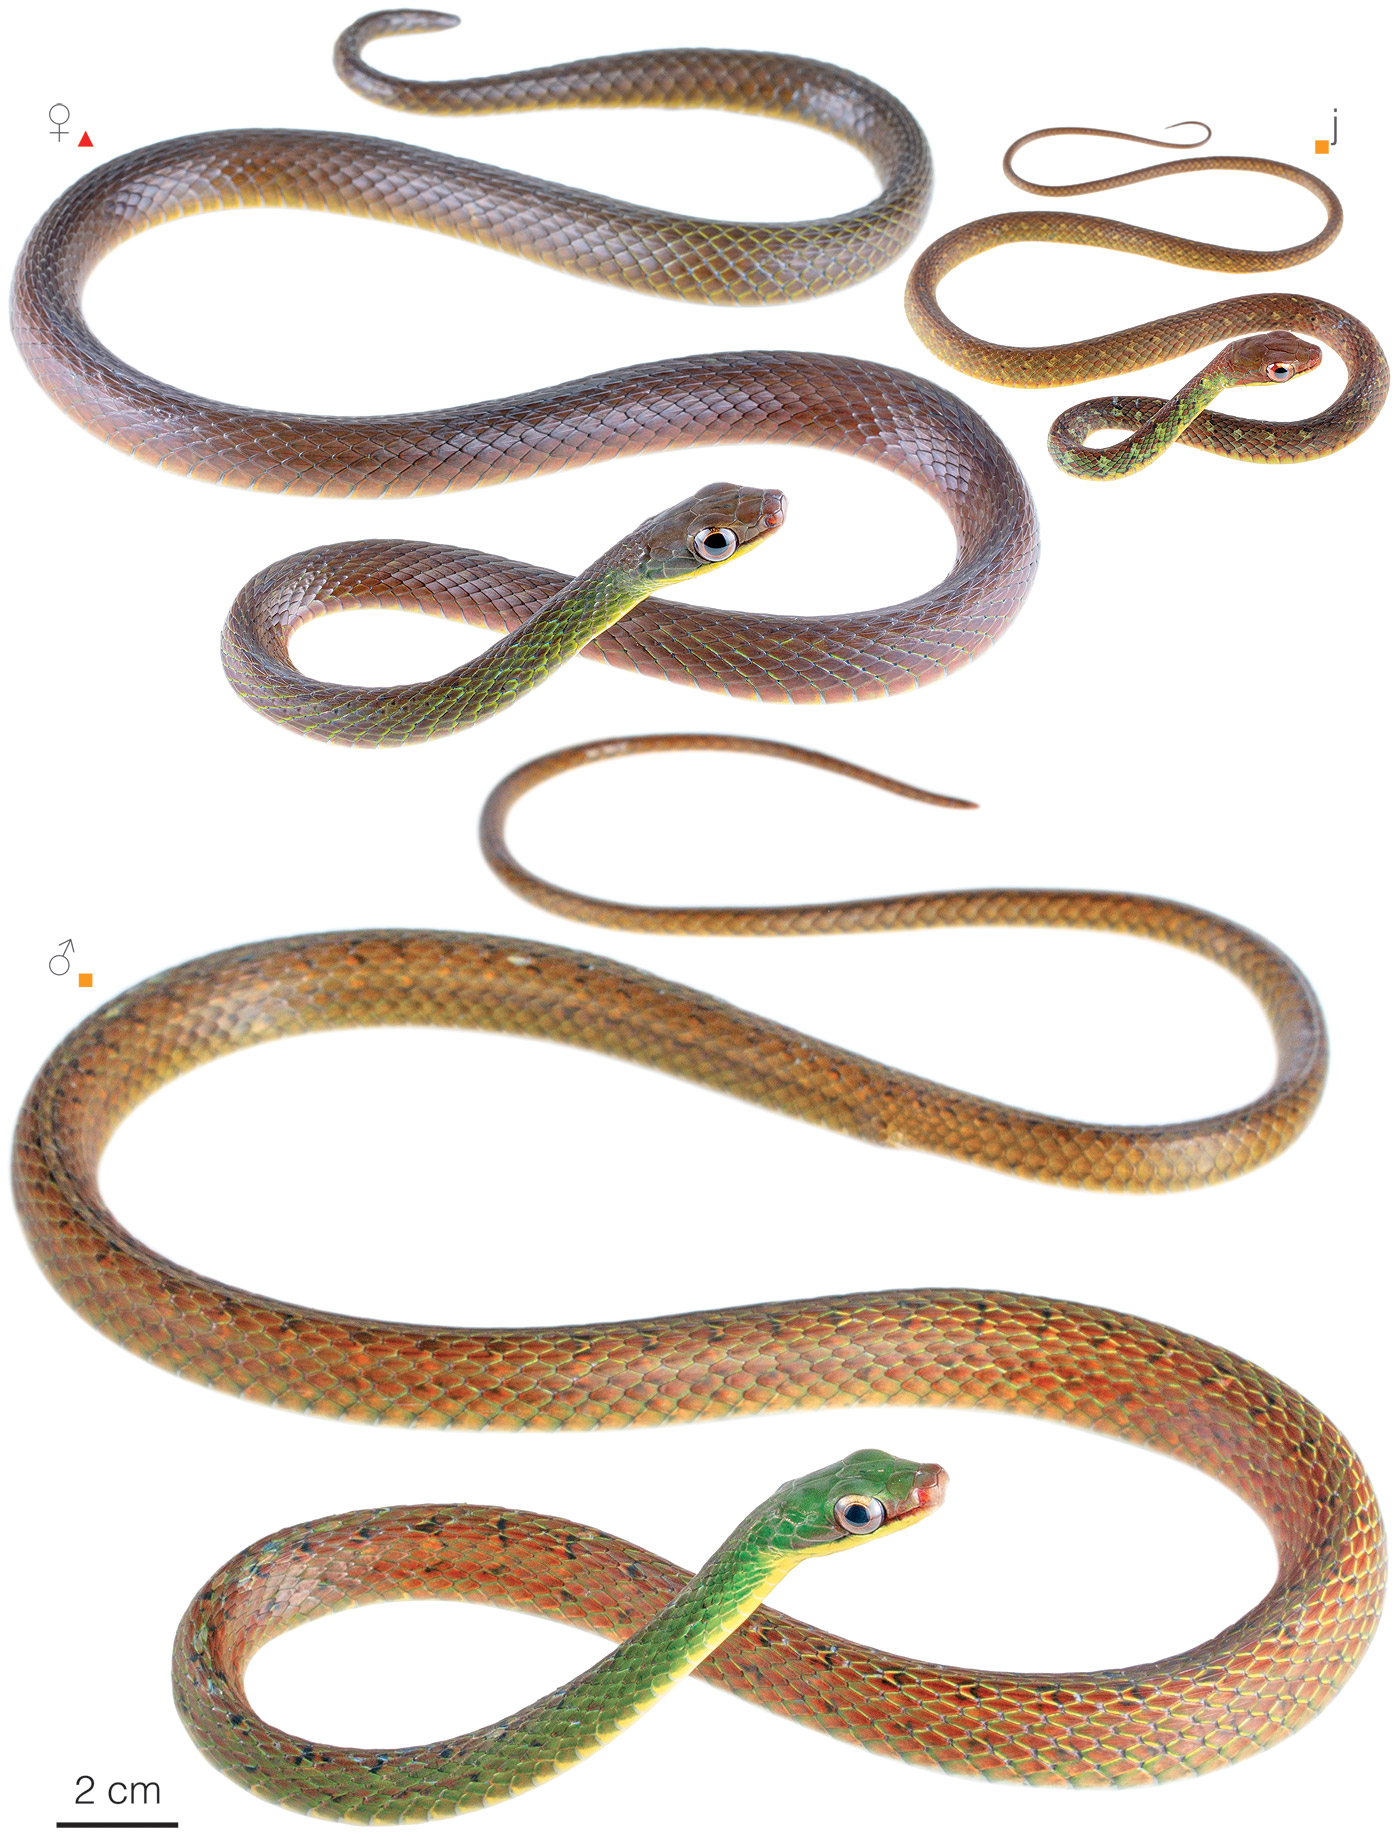 Figure showing variation among individuals of Dendrophidion graciliverpa